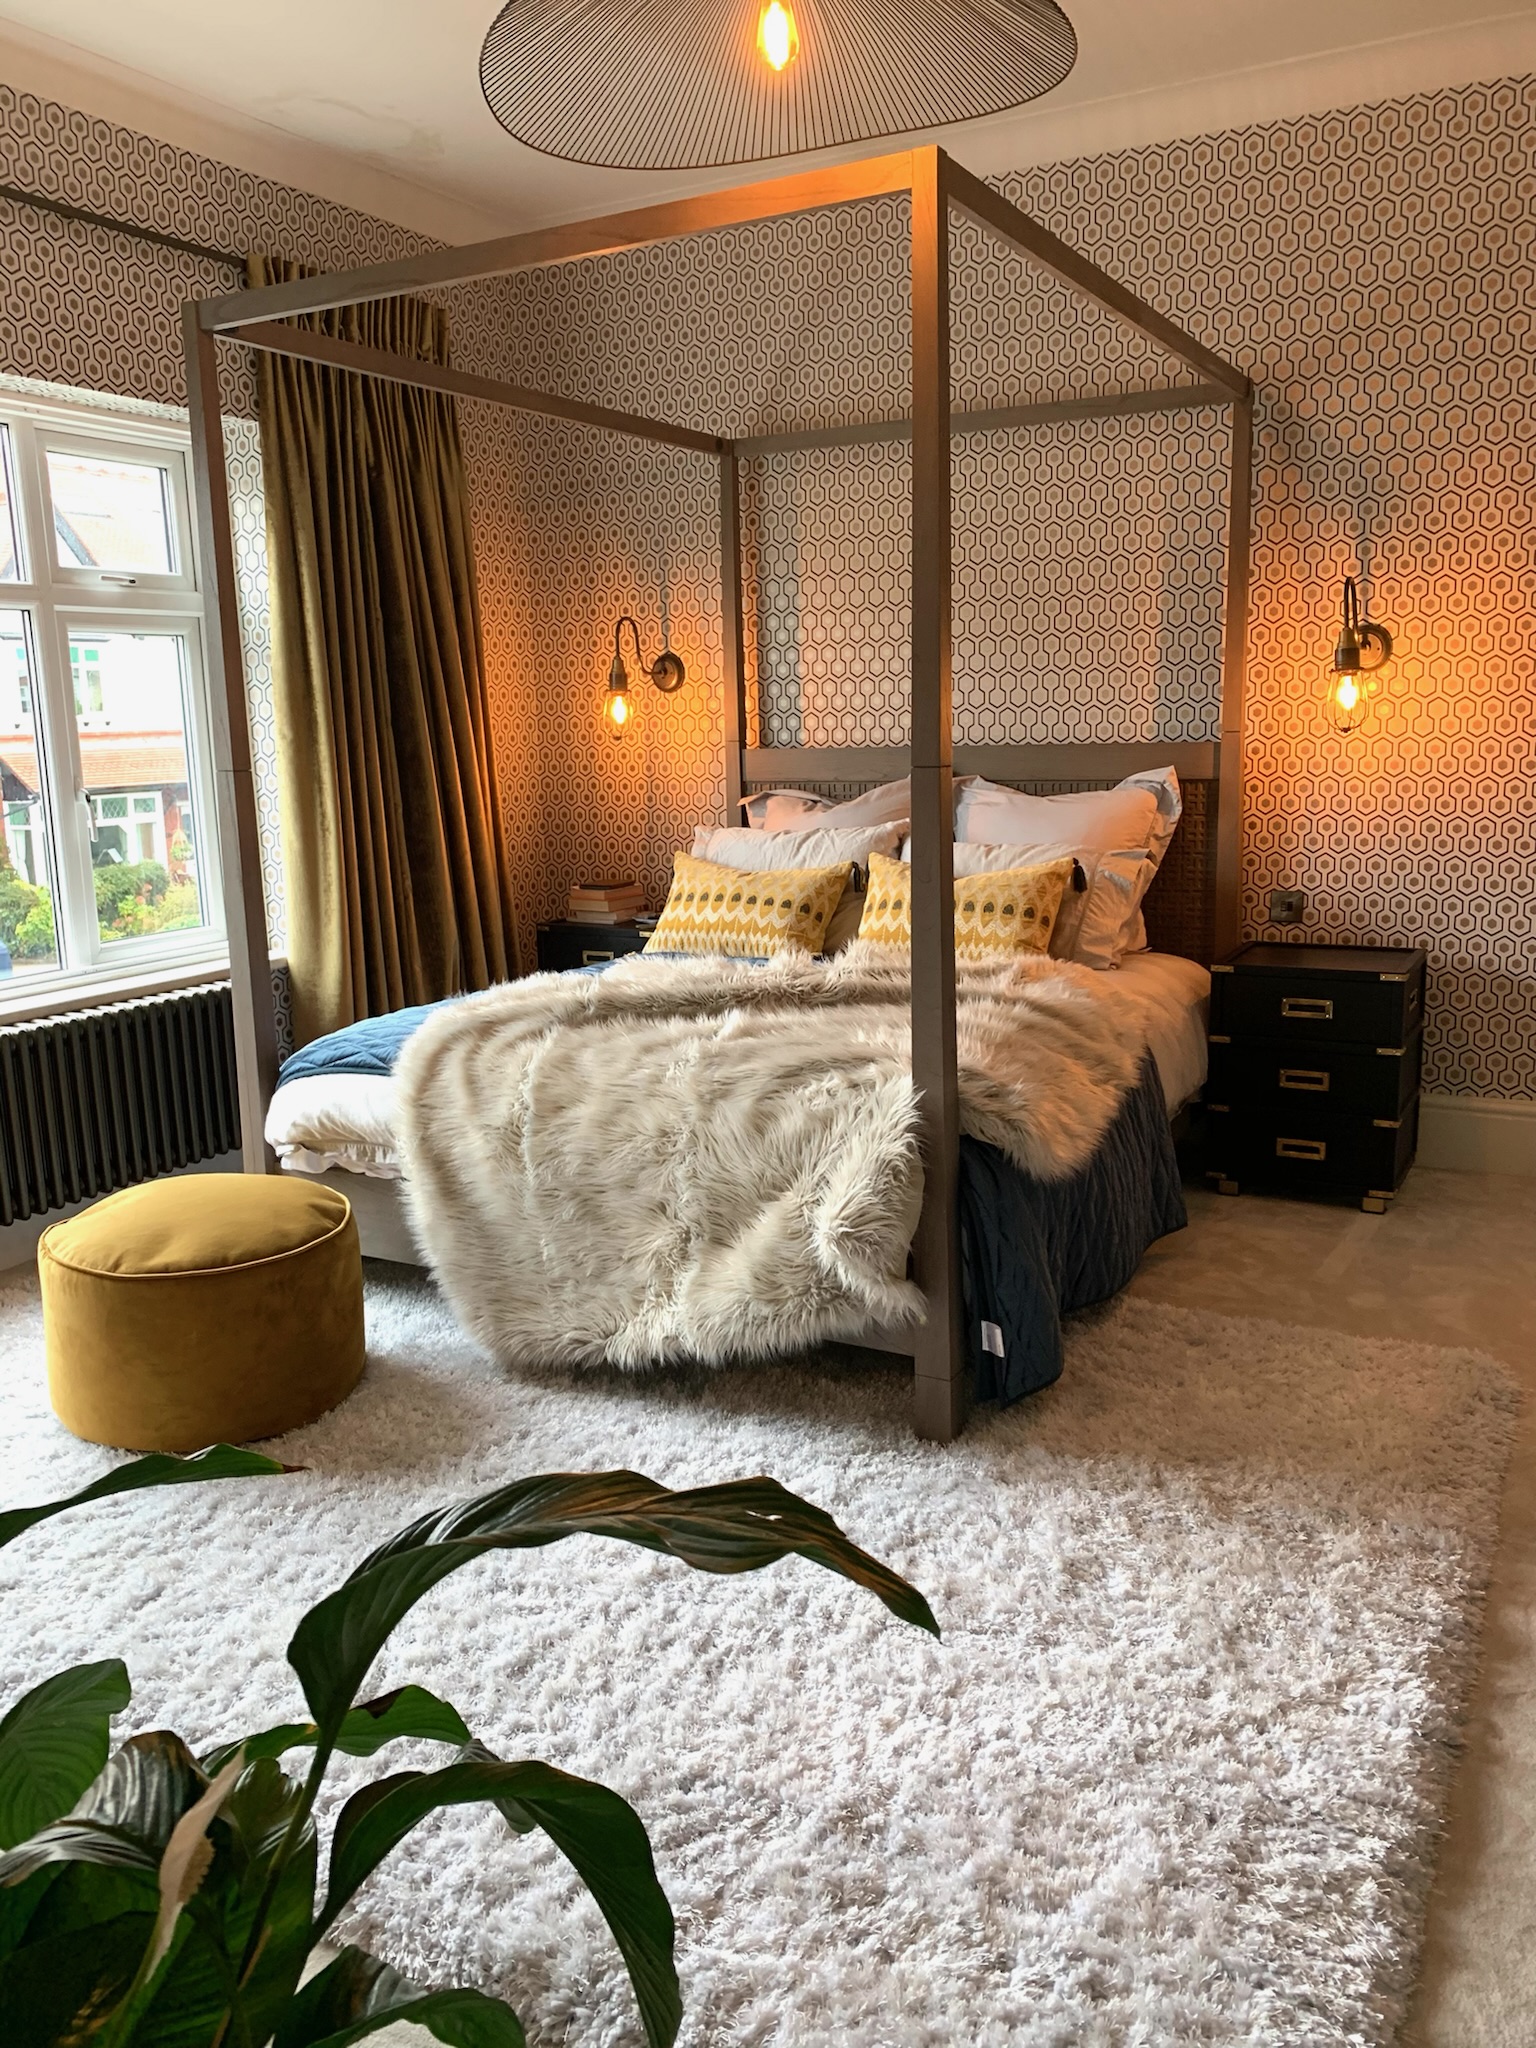 four poster bed with hexagonal print wallpaper in hale